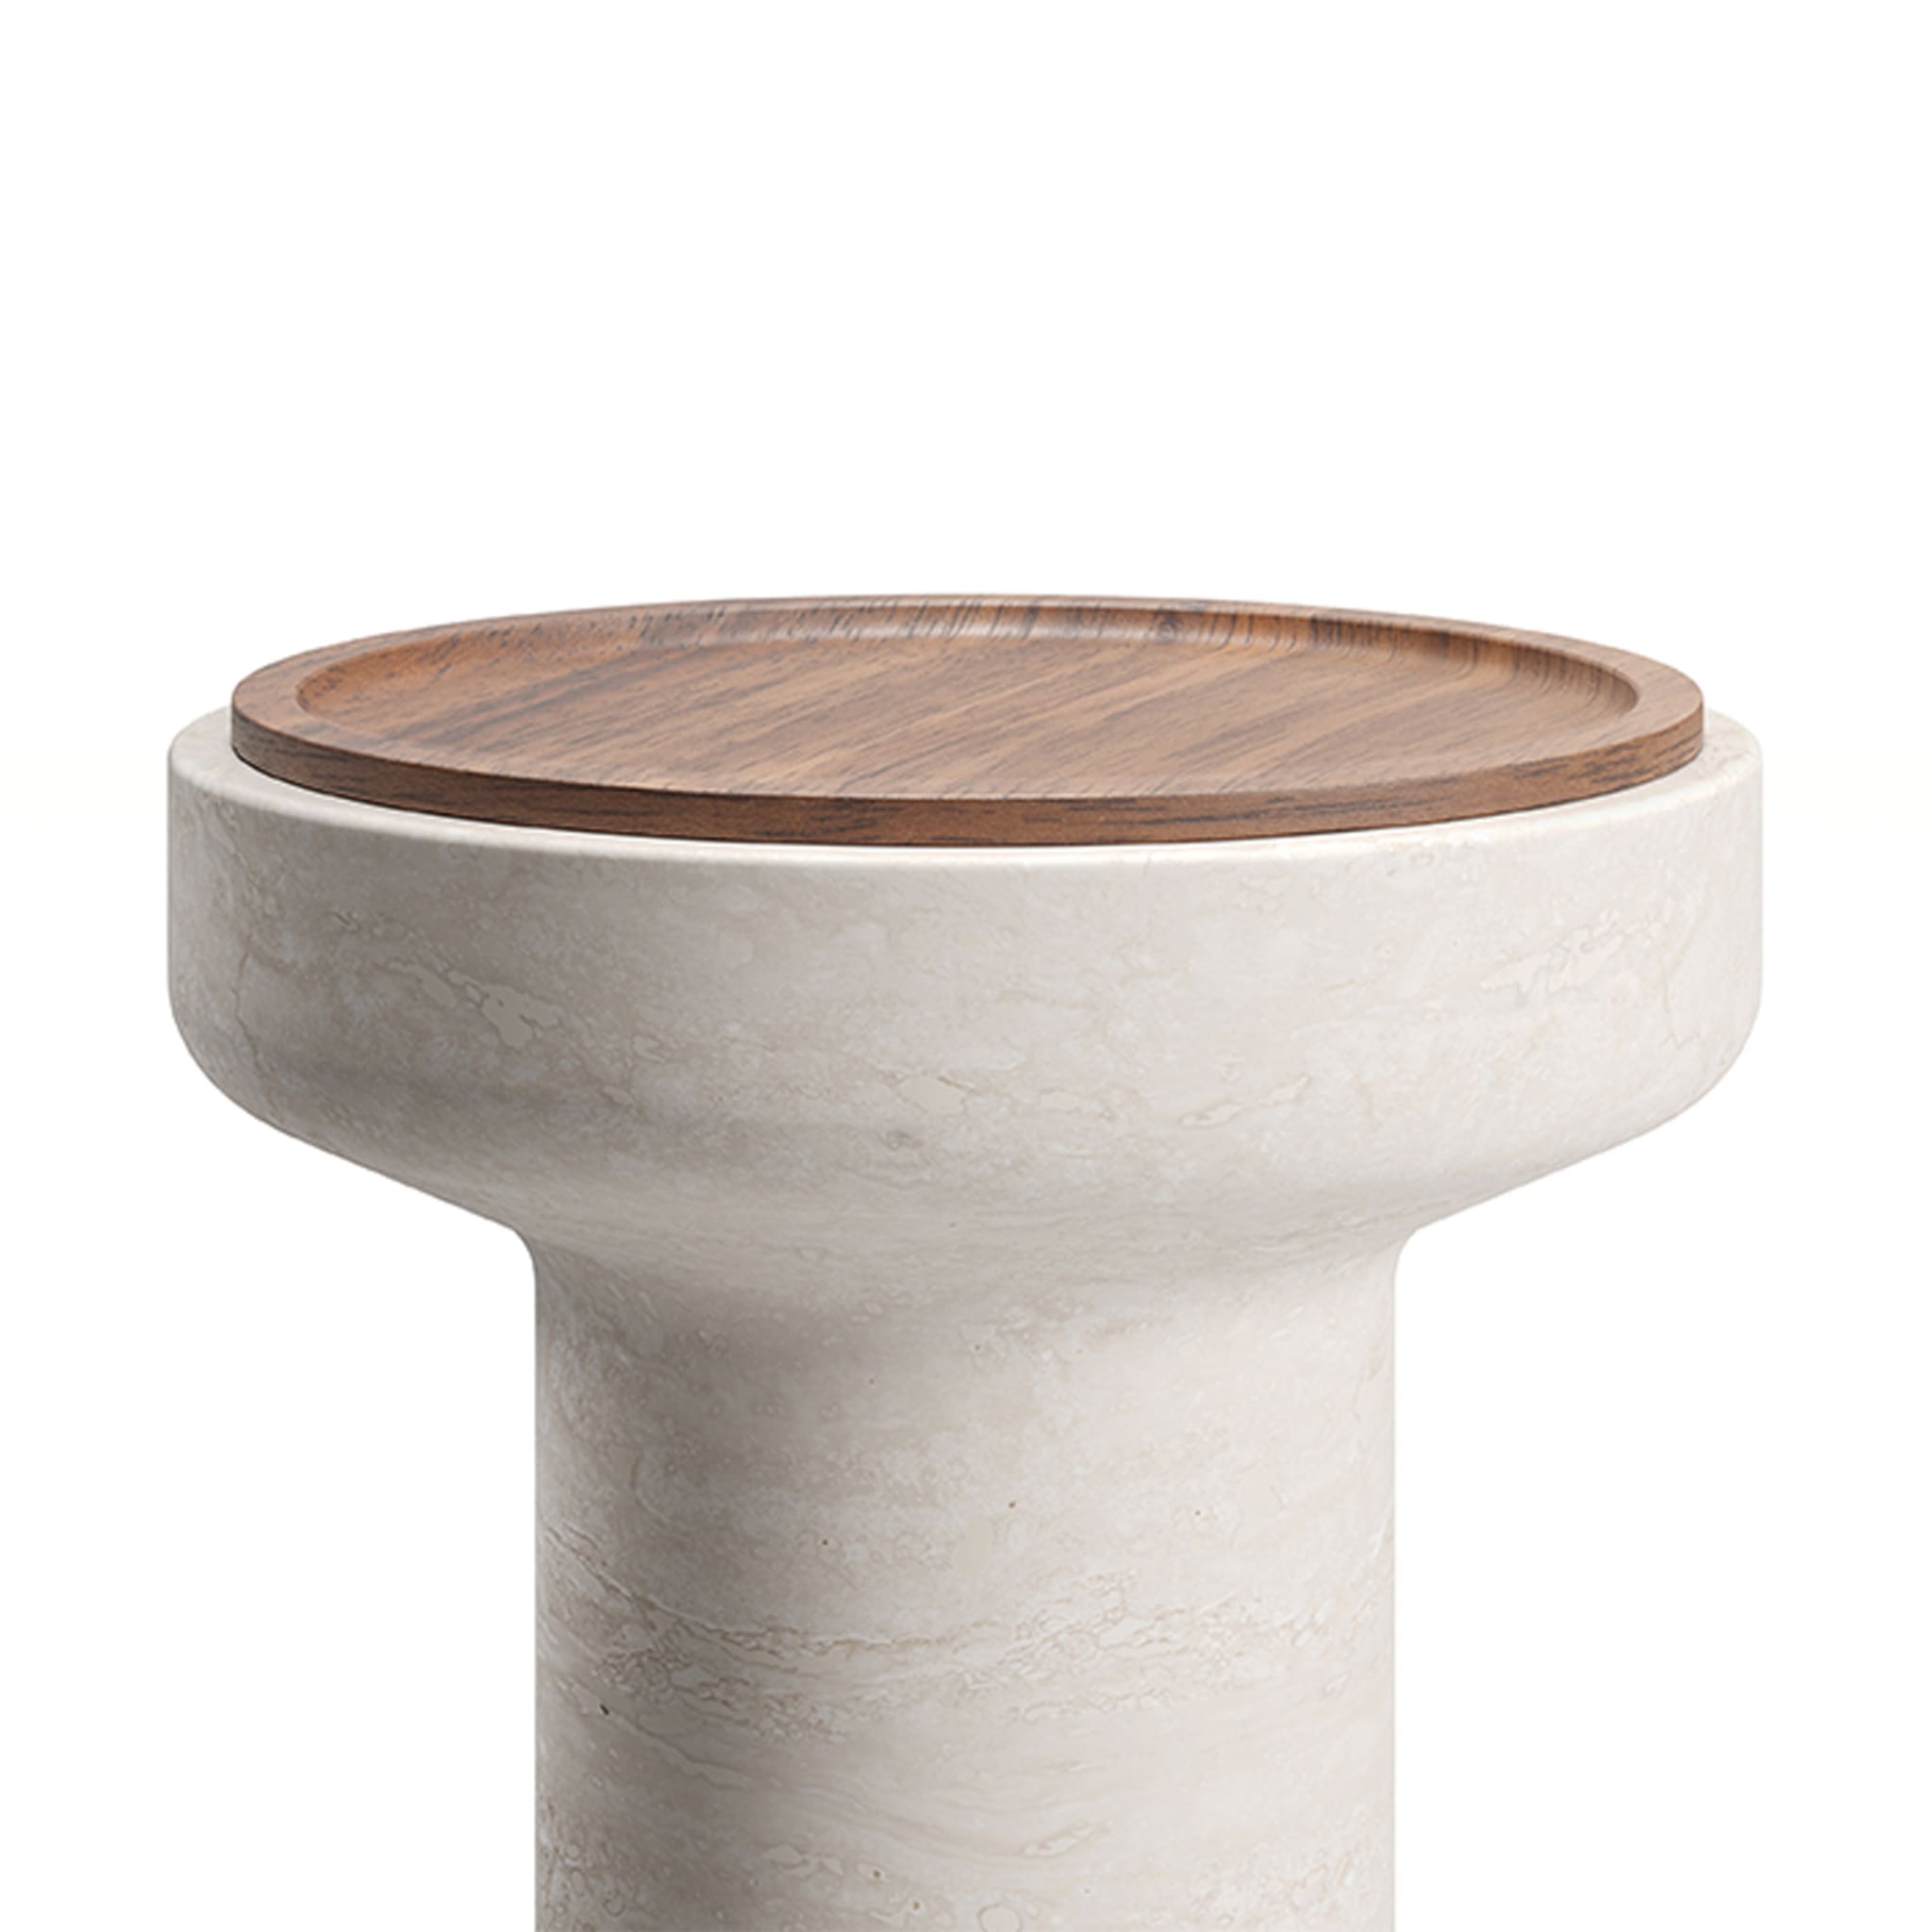 Tivoli Side Table in travertine and walnut by Ivan Colominas - Alternative view 1